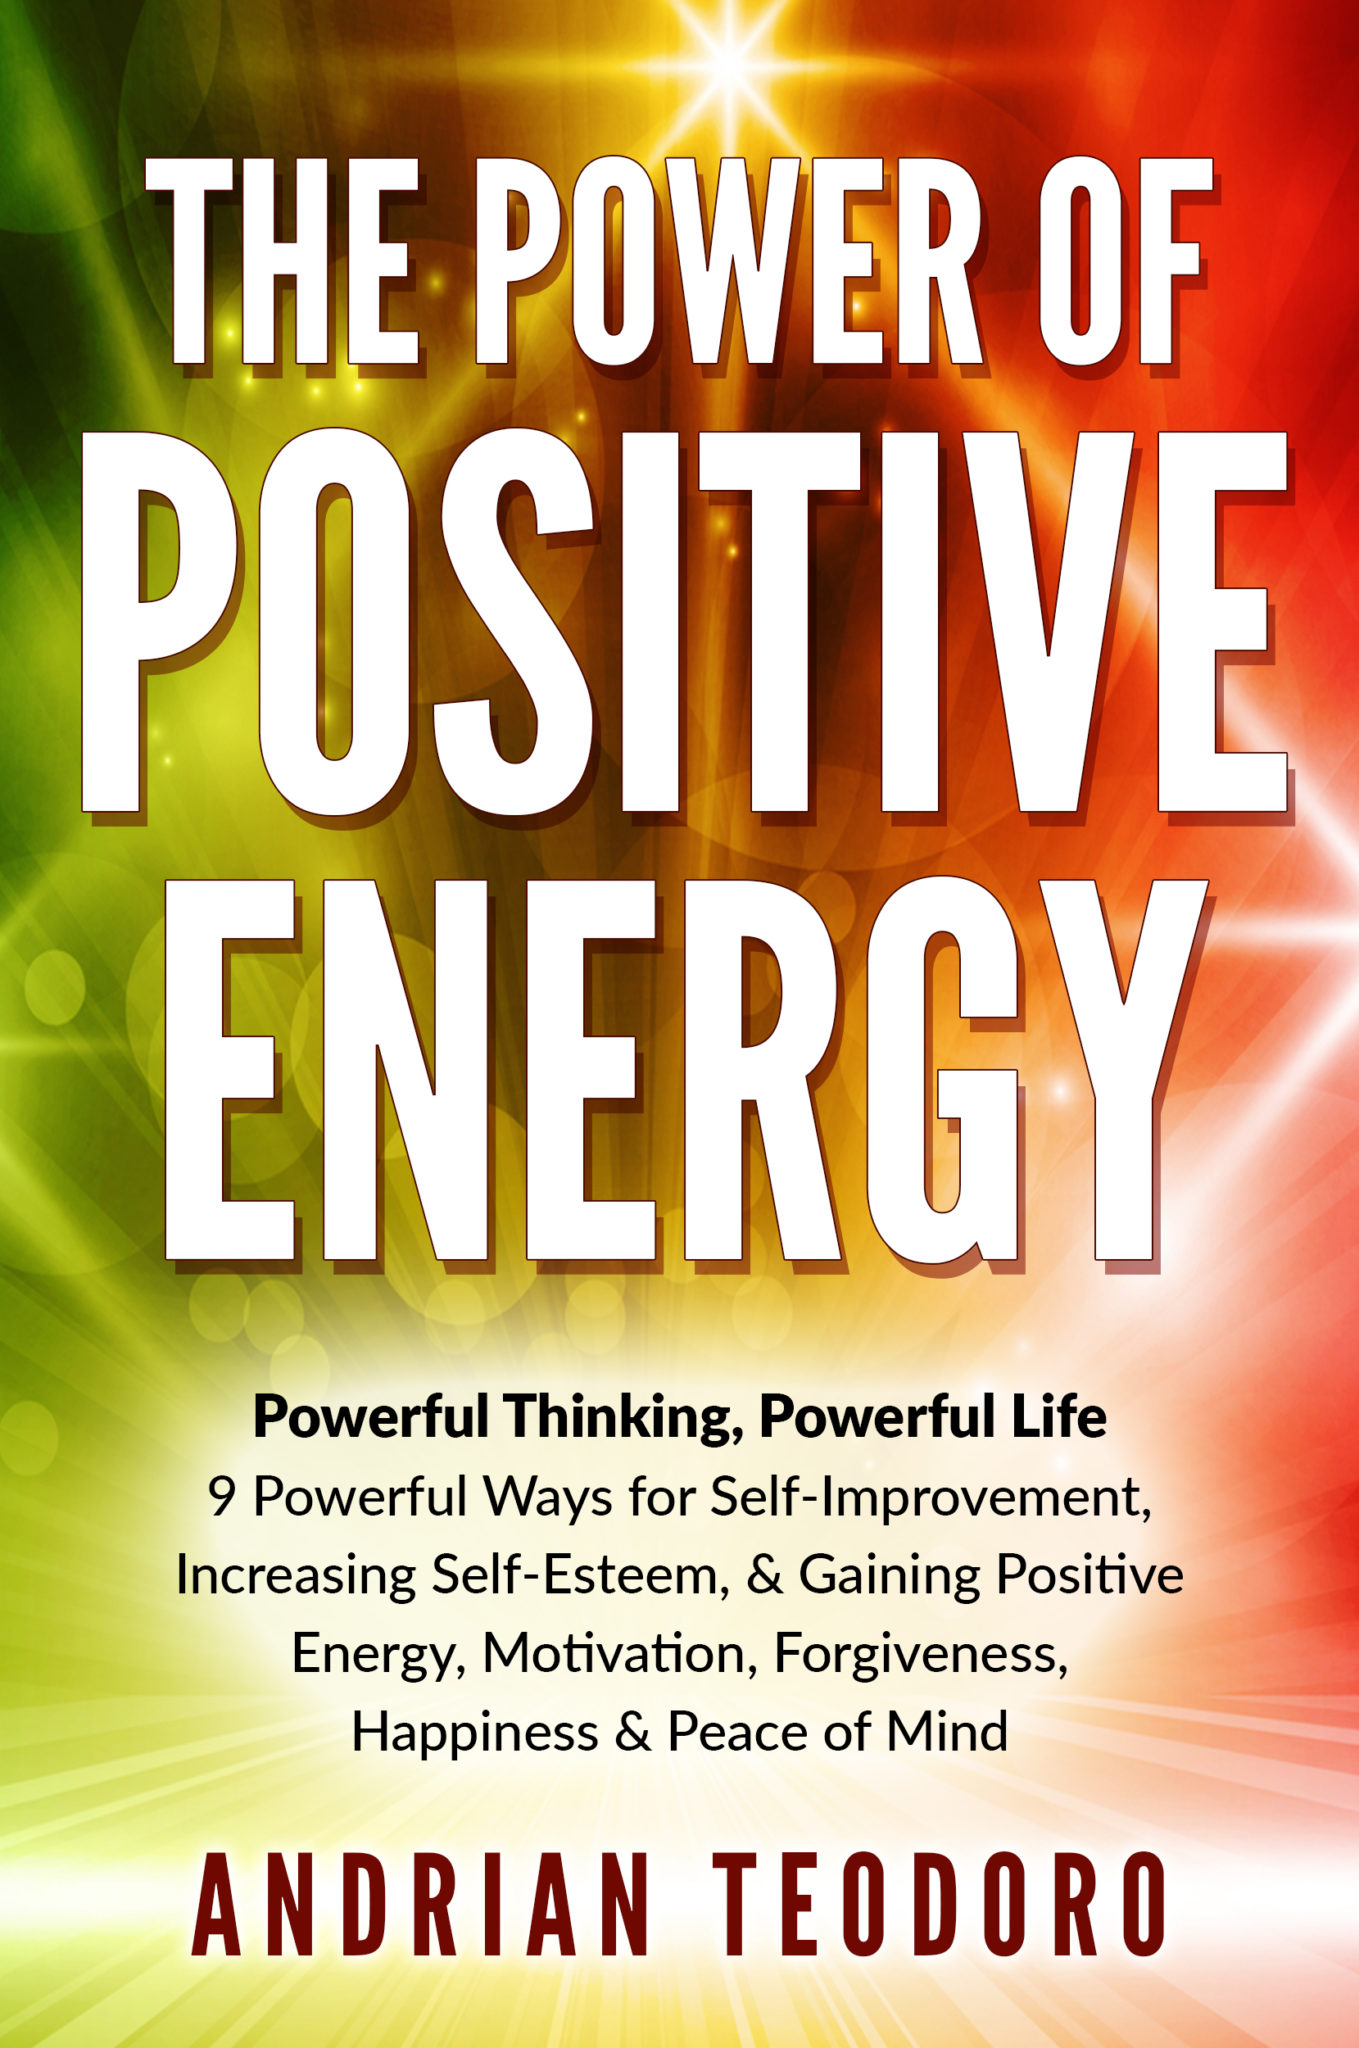 FREE: The Power of Positive Energy: Powerful Thinking, Powerful Life by Andrian Teodoro by Andrian Teodoro